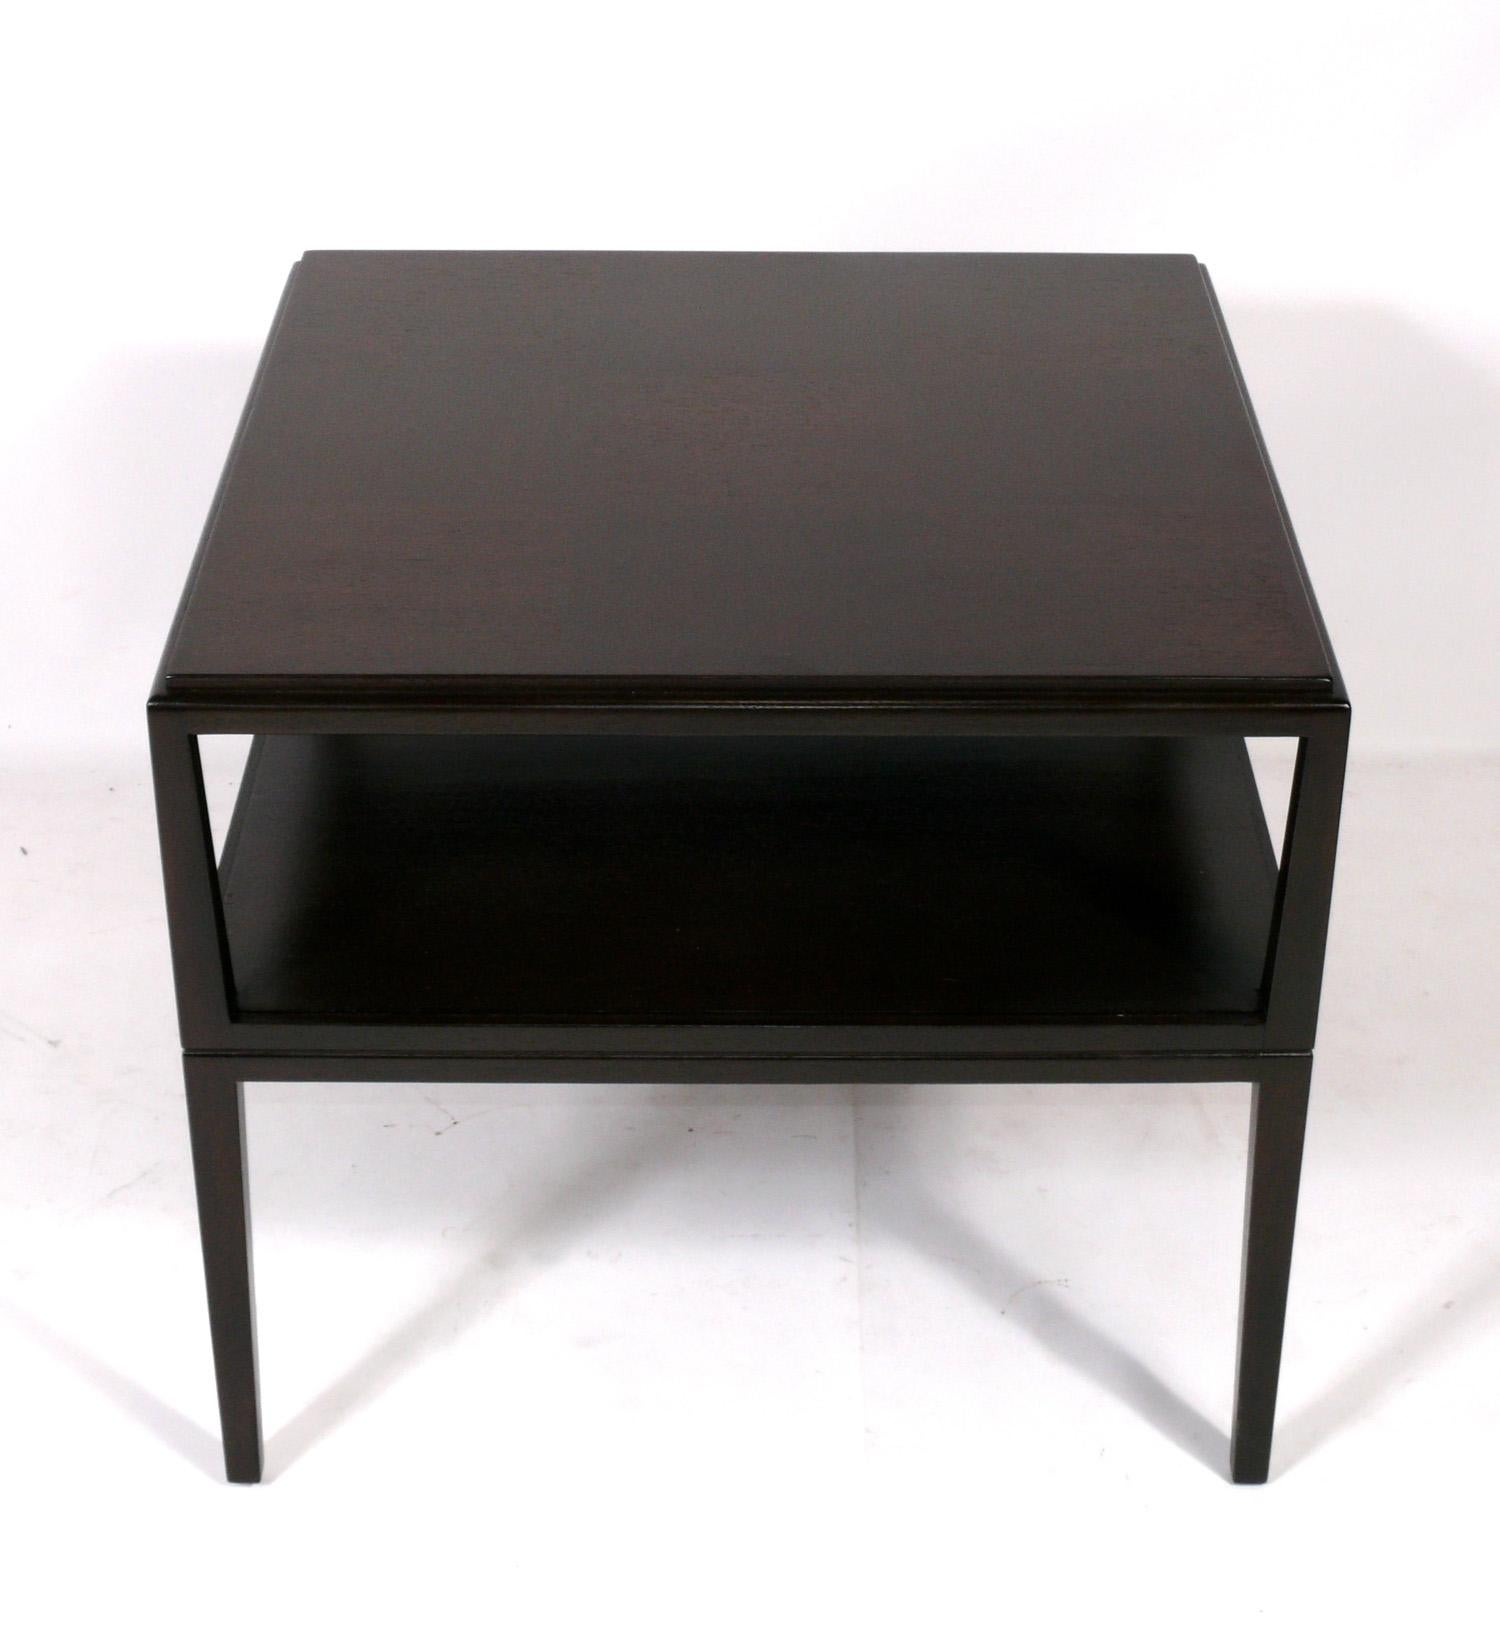 Large scale end or side table, designed by Tommi Parzinger for Charak Modern, American, circa 1950s. This piece is a versatile size and can be used as a side or end table, or as a night stand, lamp or center table. It has been newly refinished in an